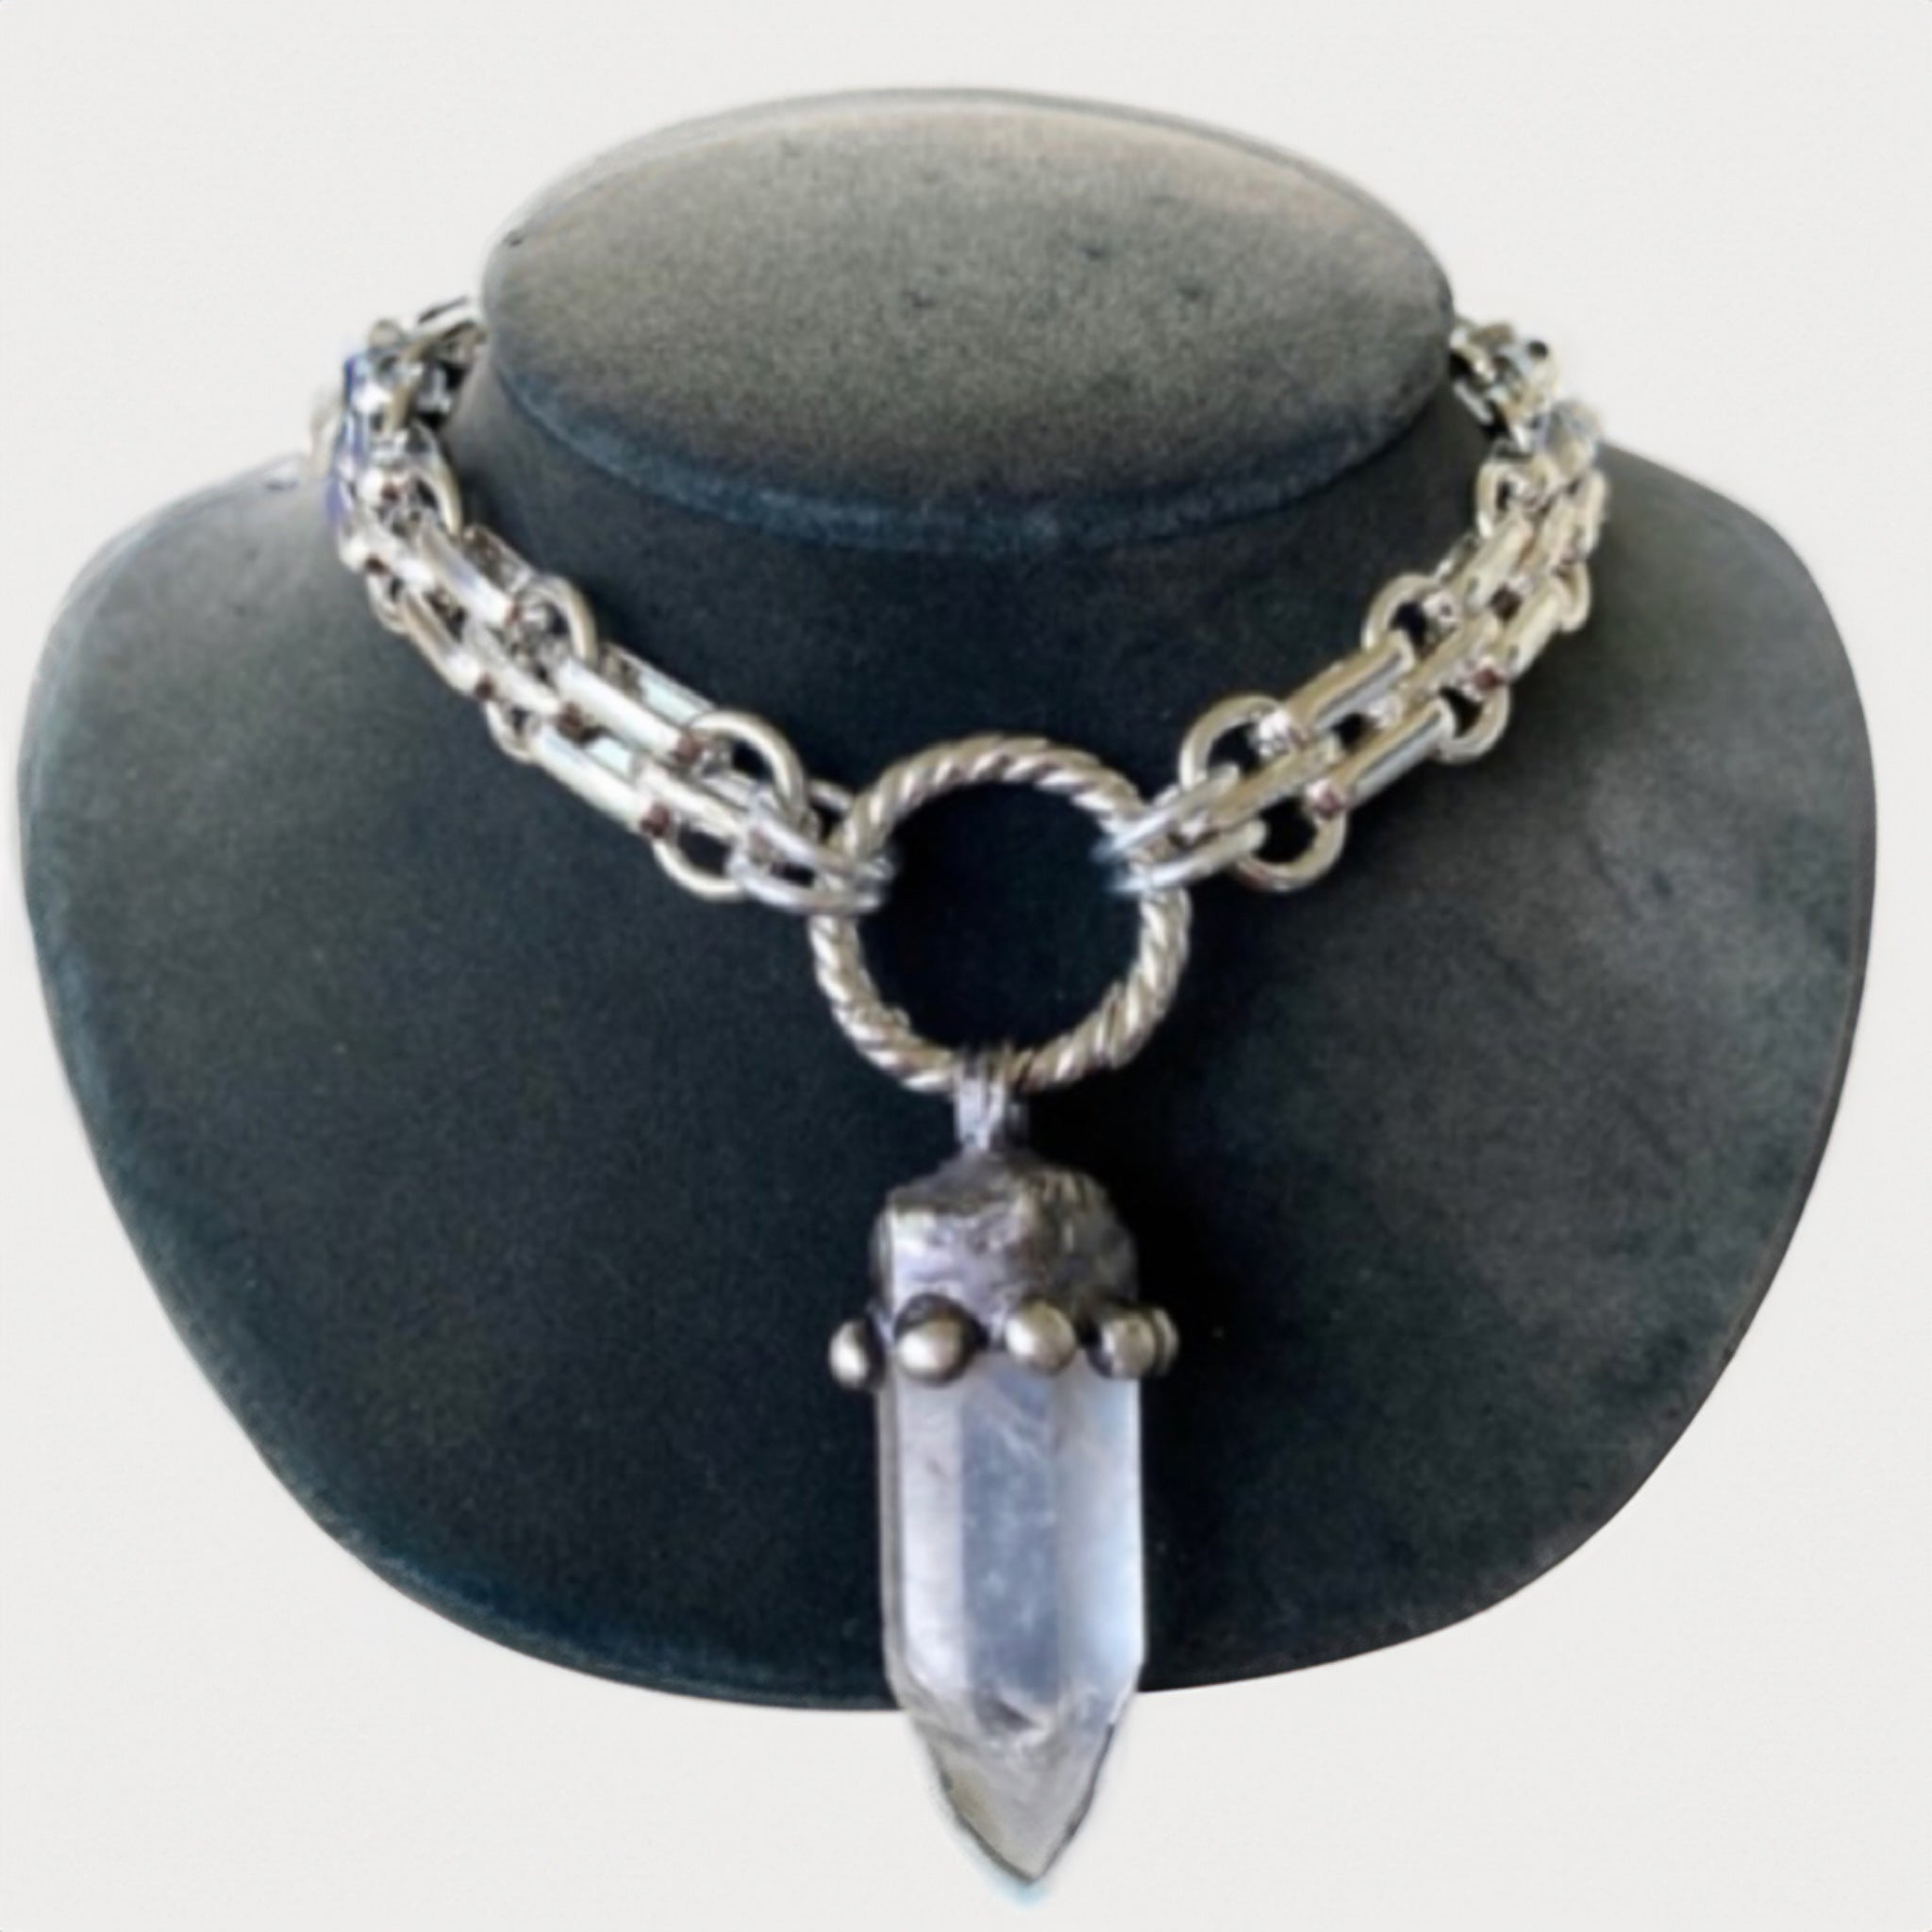 Giant Point Quartz Stainless Front Clasp Necklace